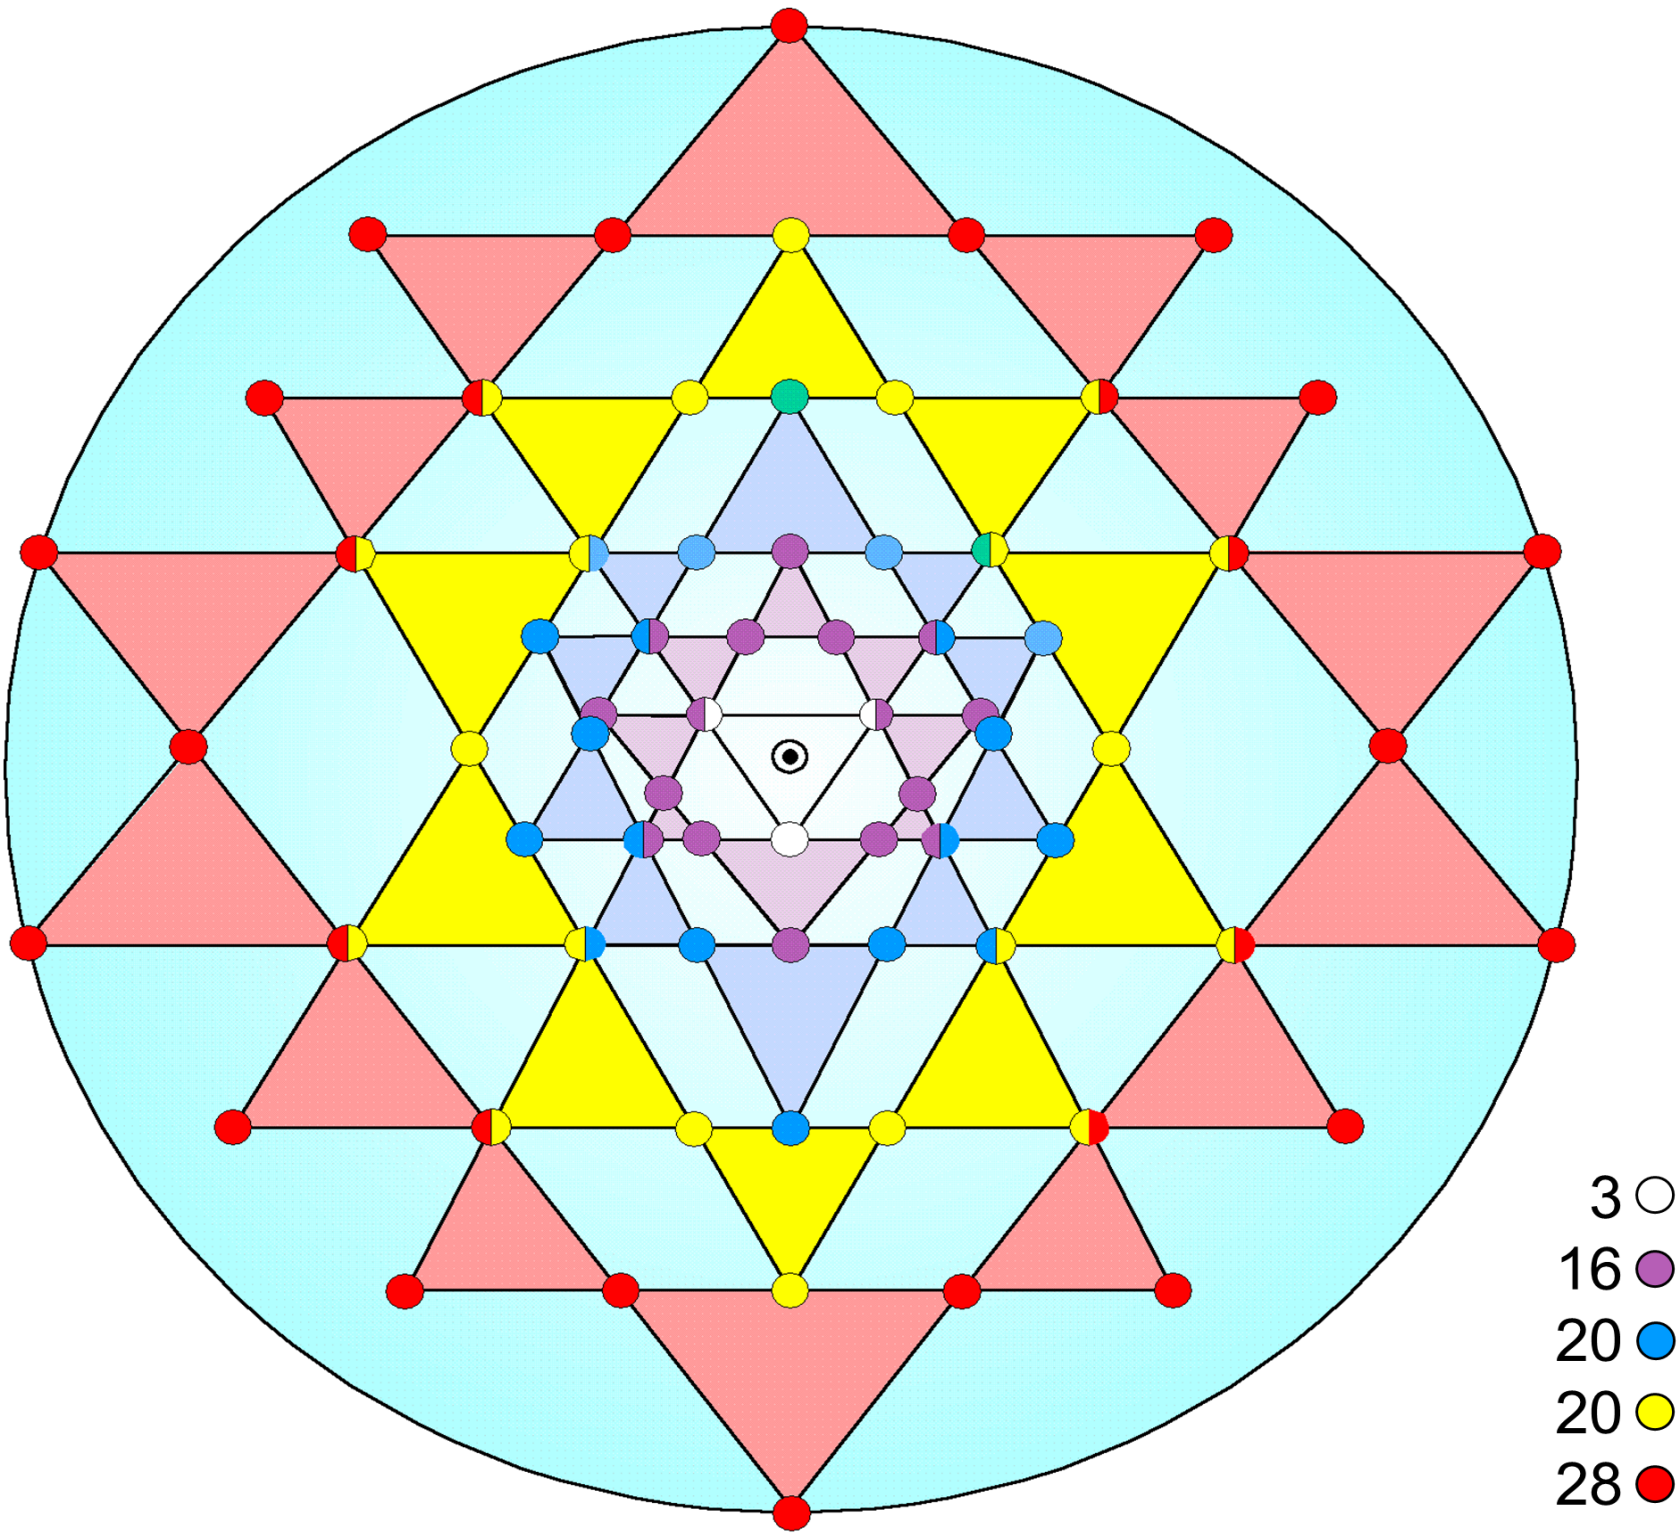 89 points in the 3-d Sri Yantra